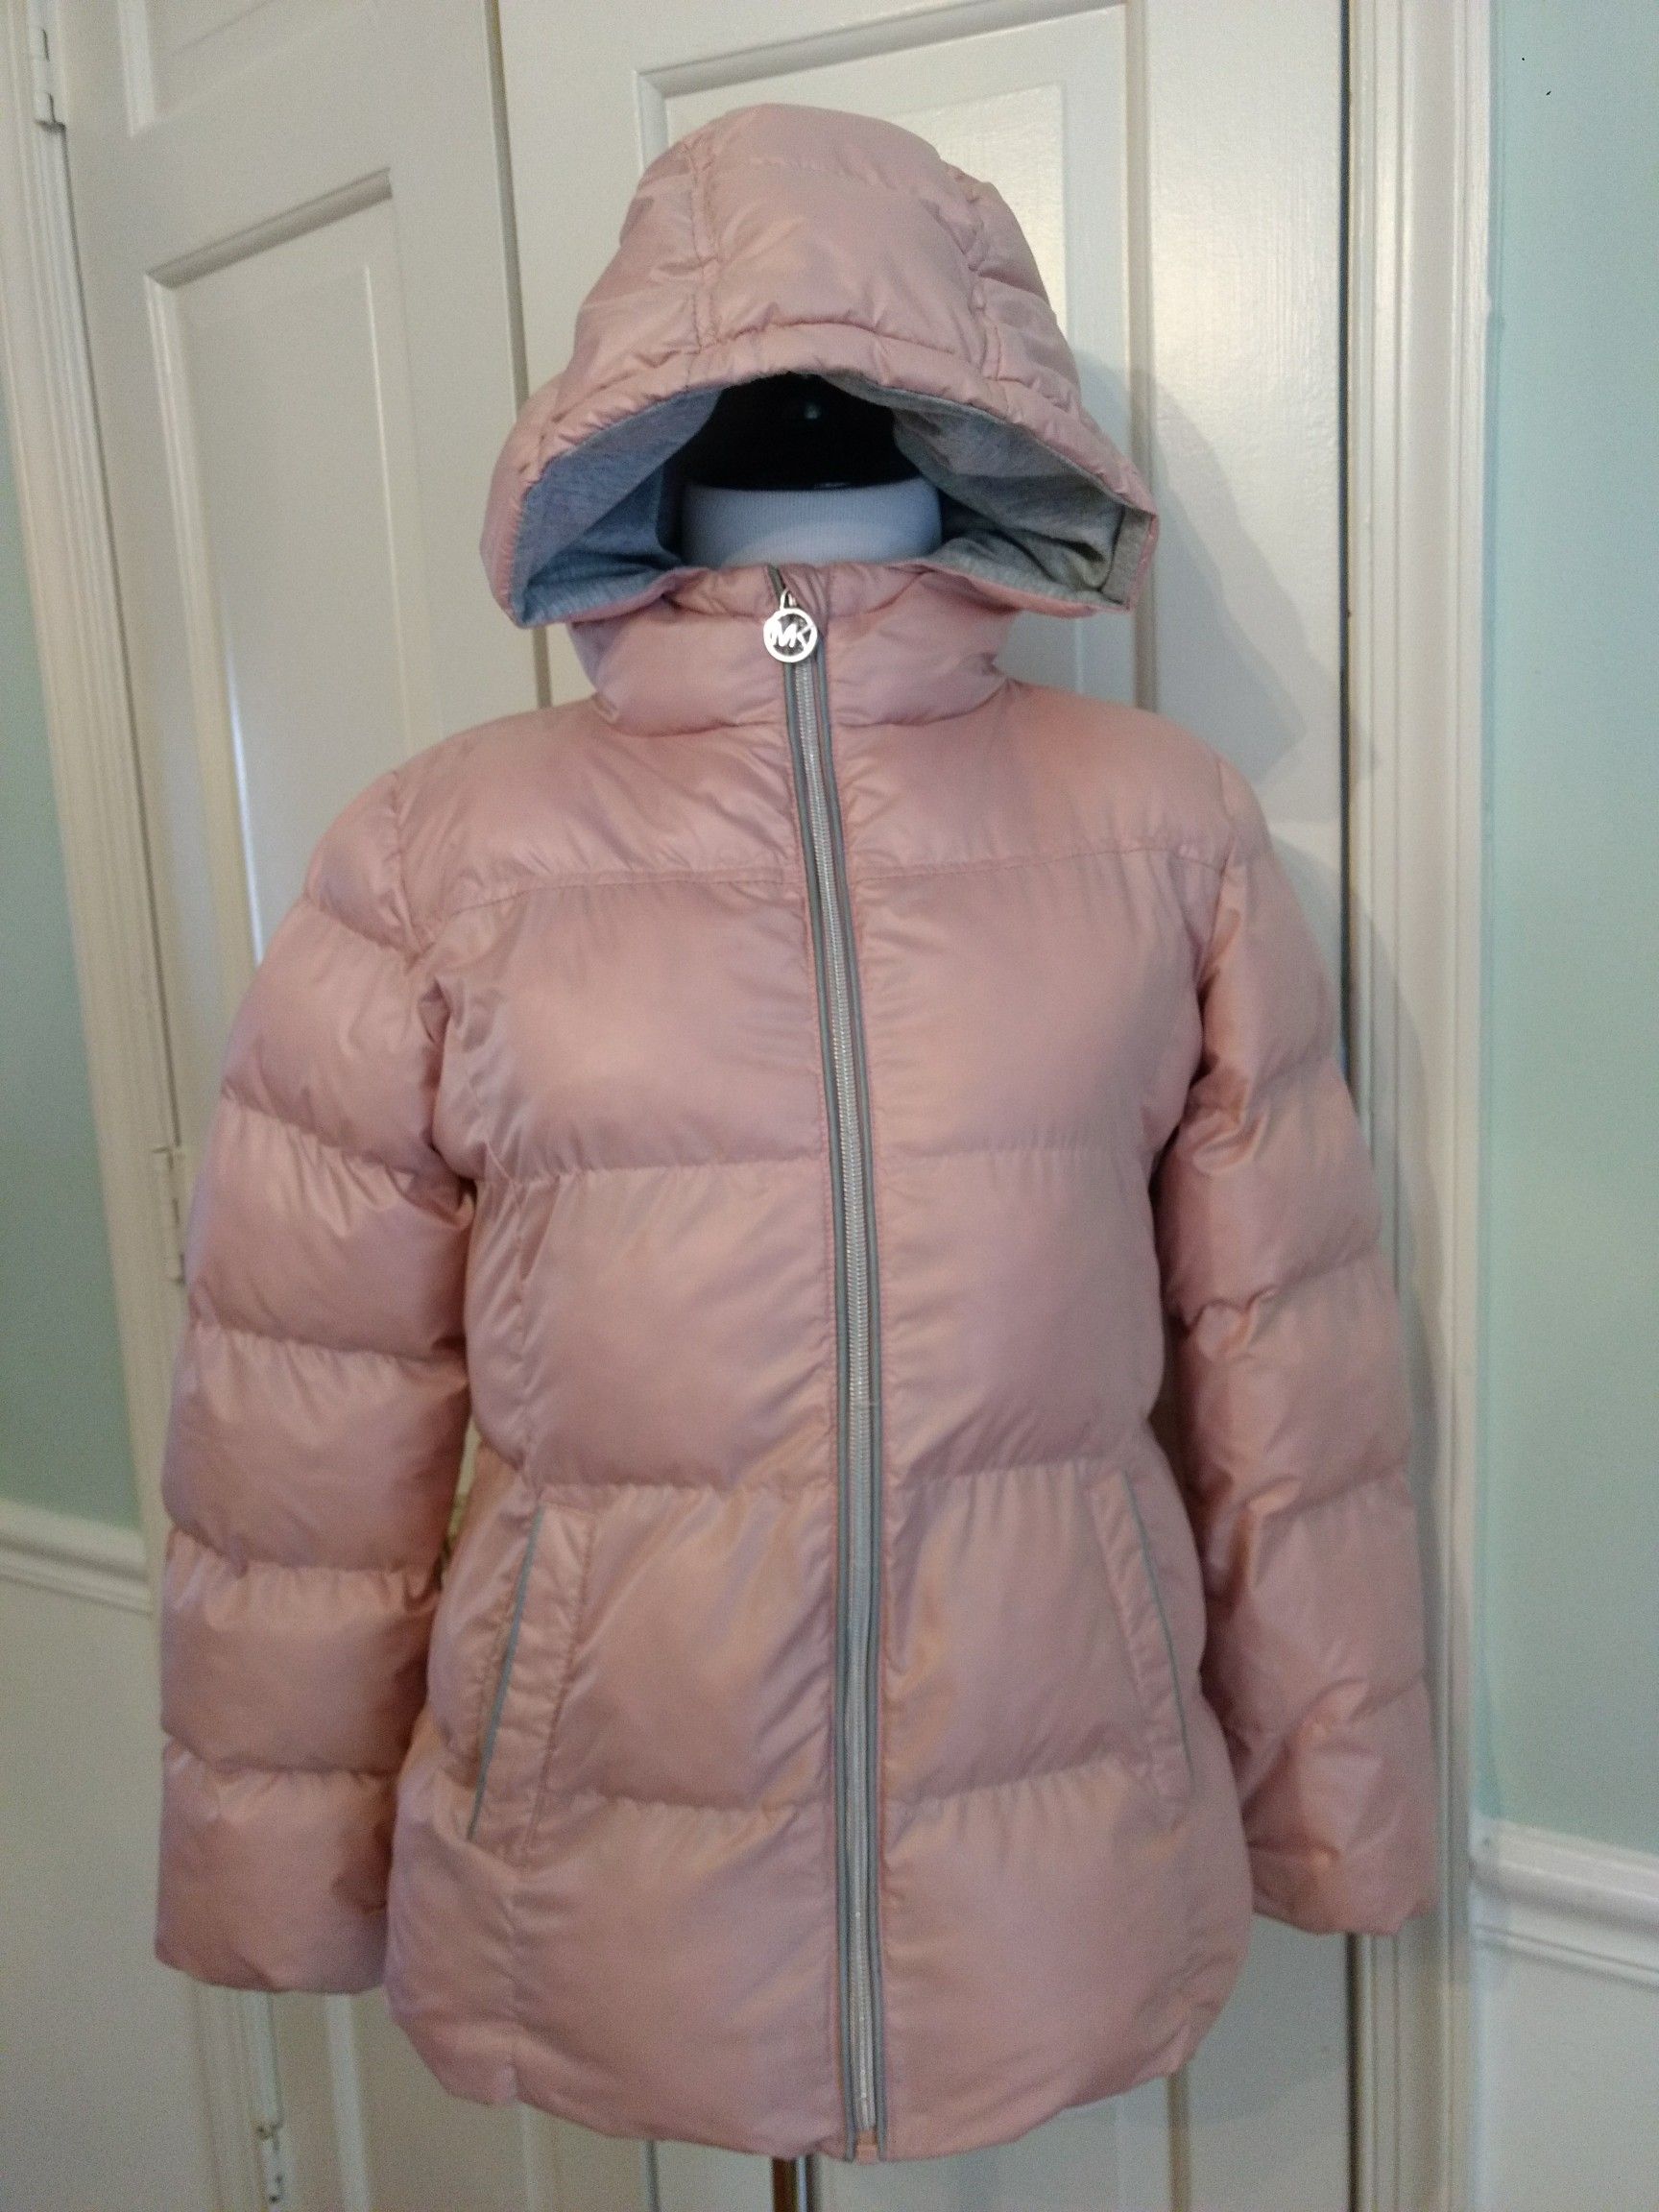 Hooded puffer coat, size 10-12, by "Michael Kors"